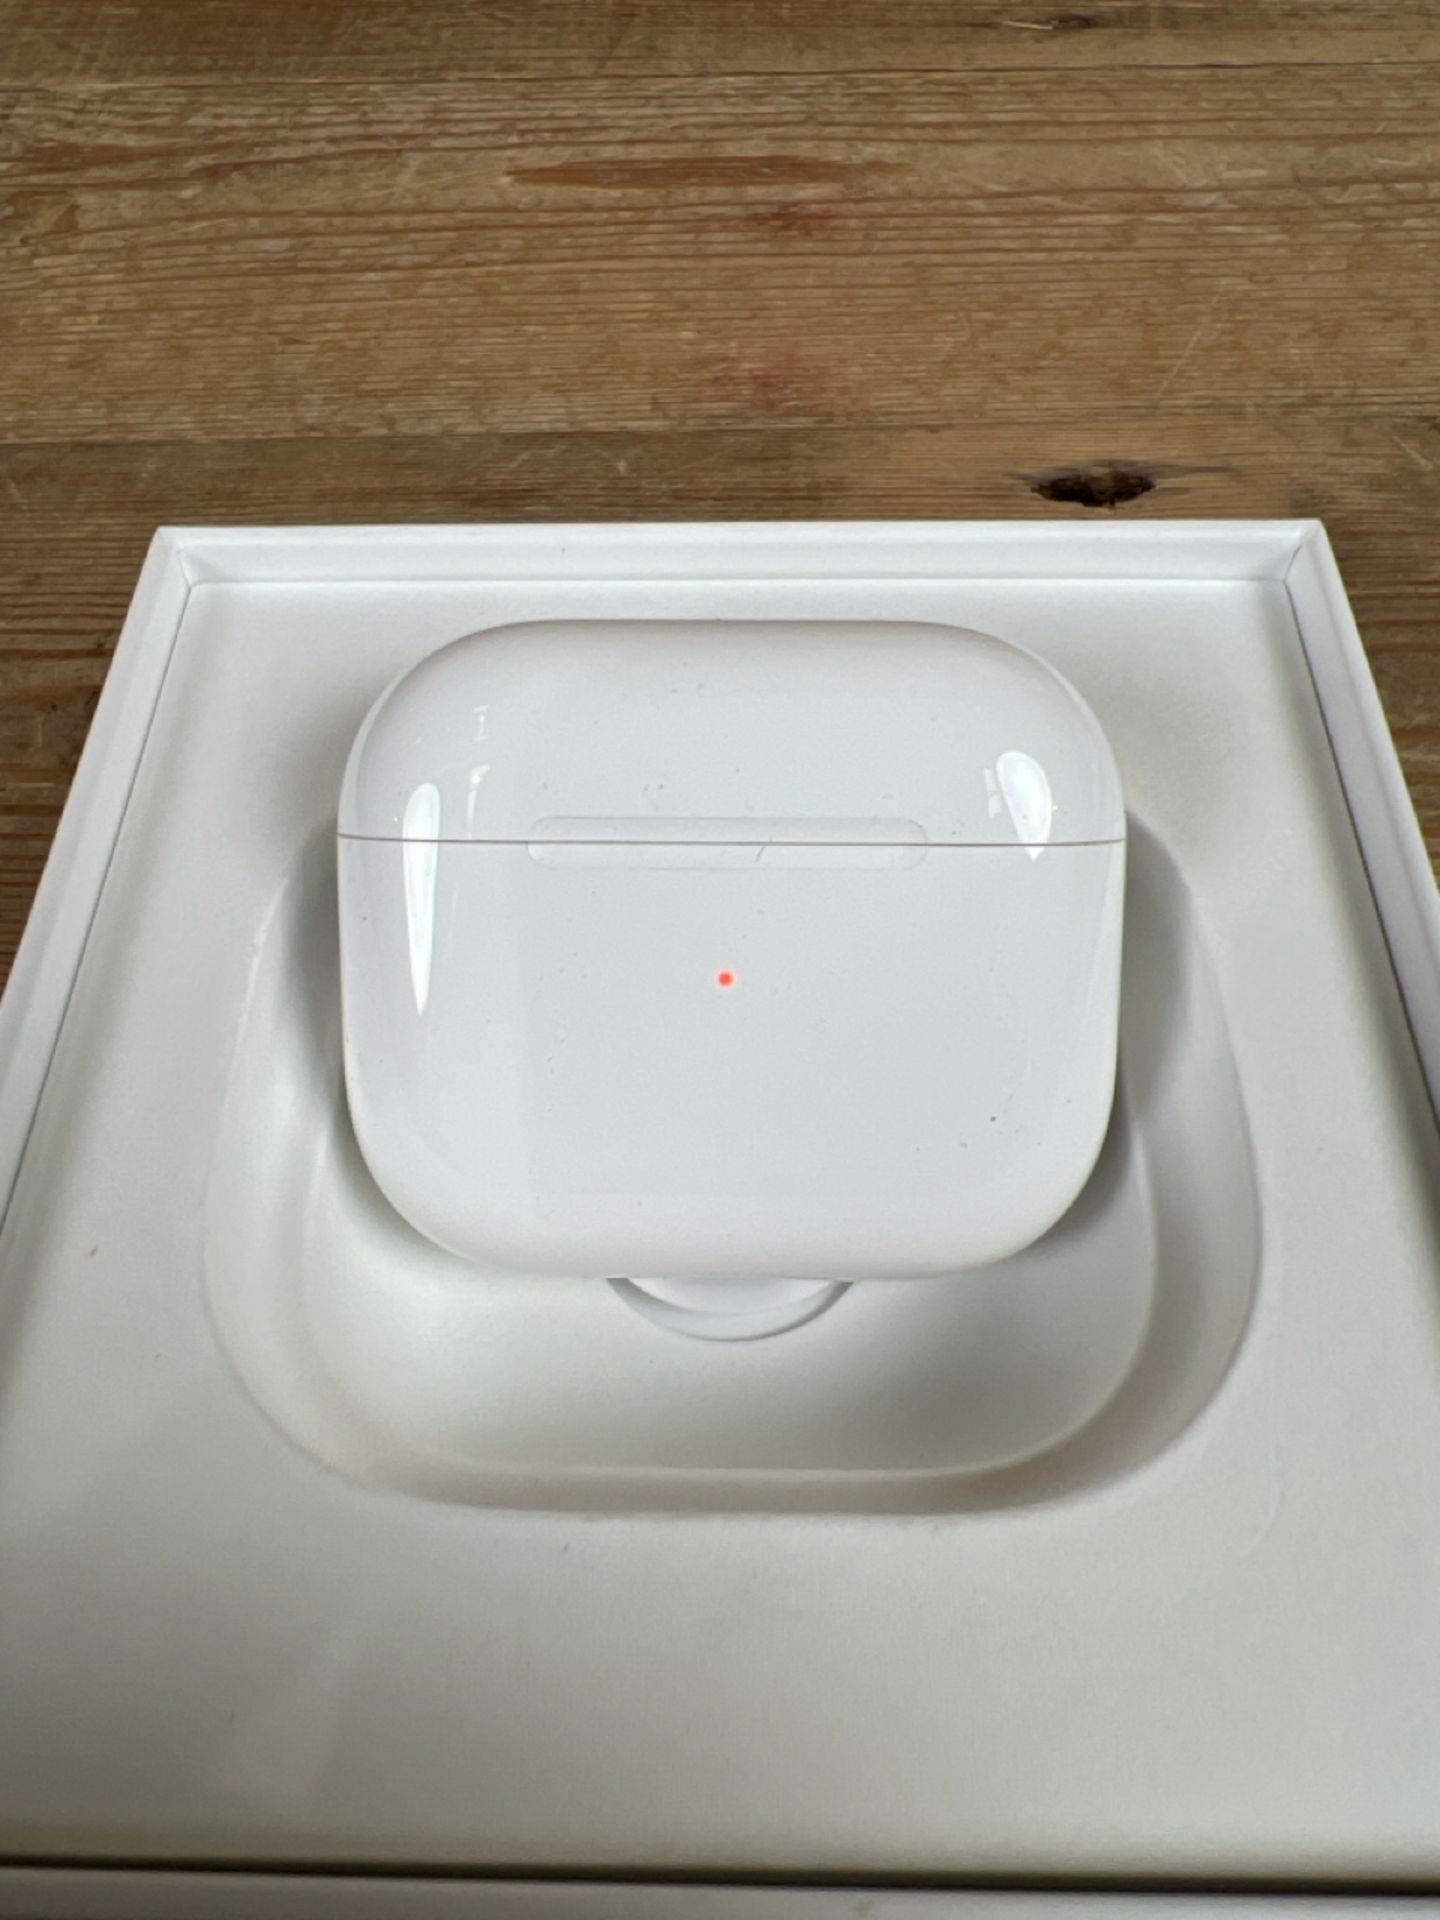 Apple Air Pods (3rd Generation) Charging Case Included - Image 4 of 5